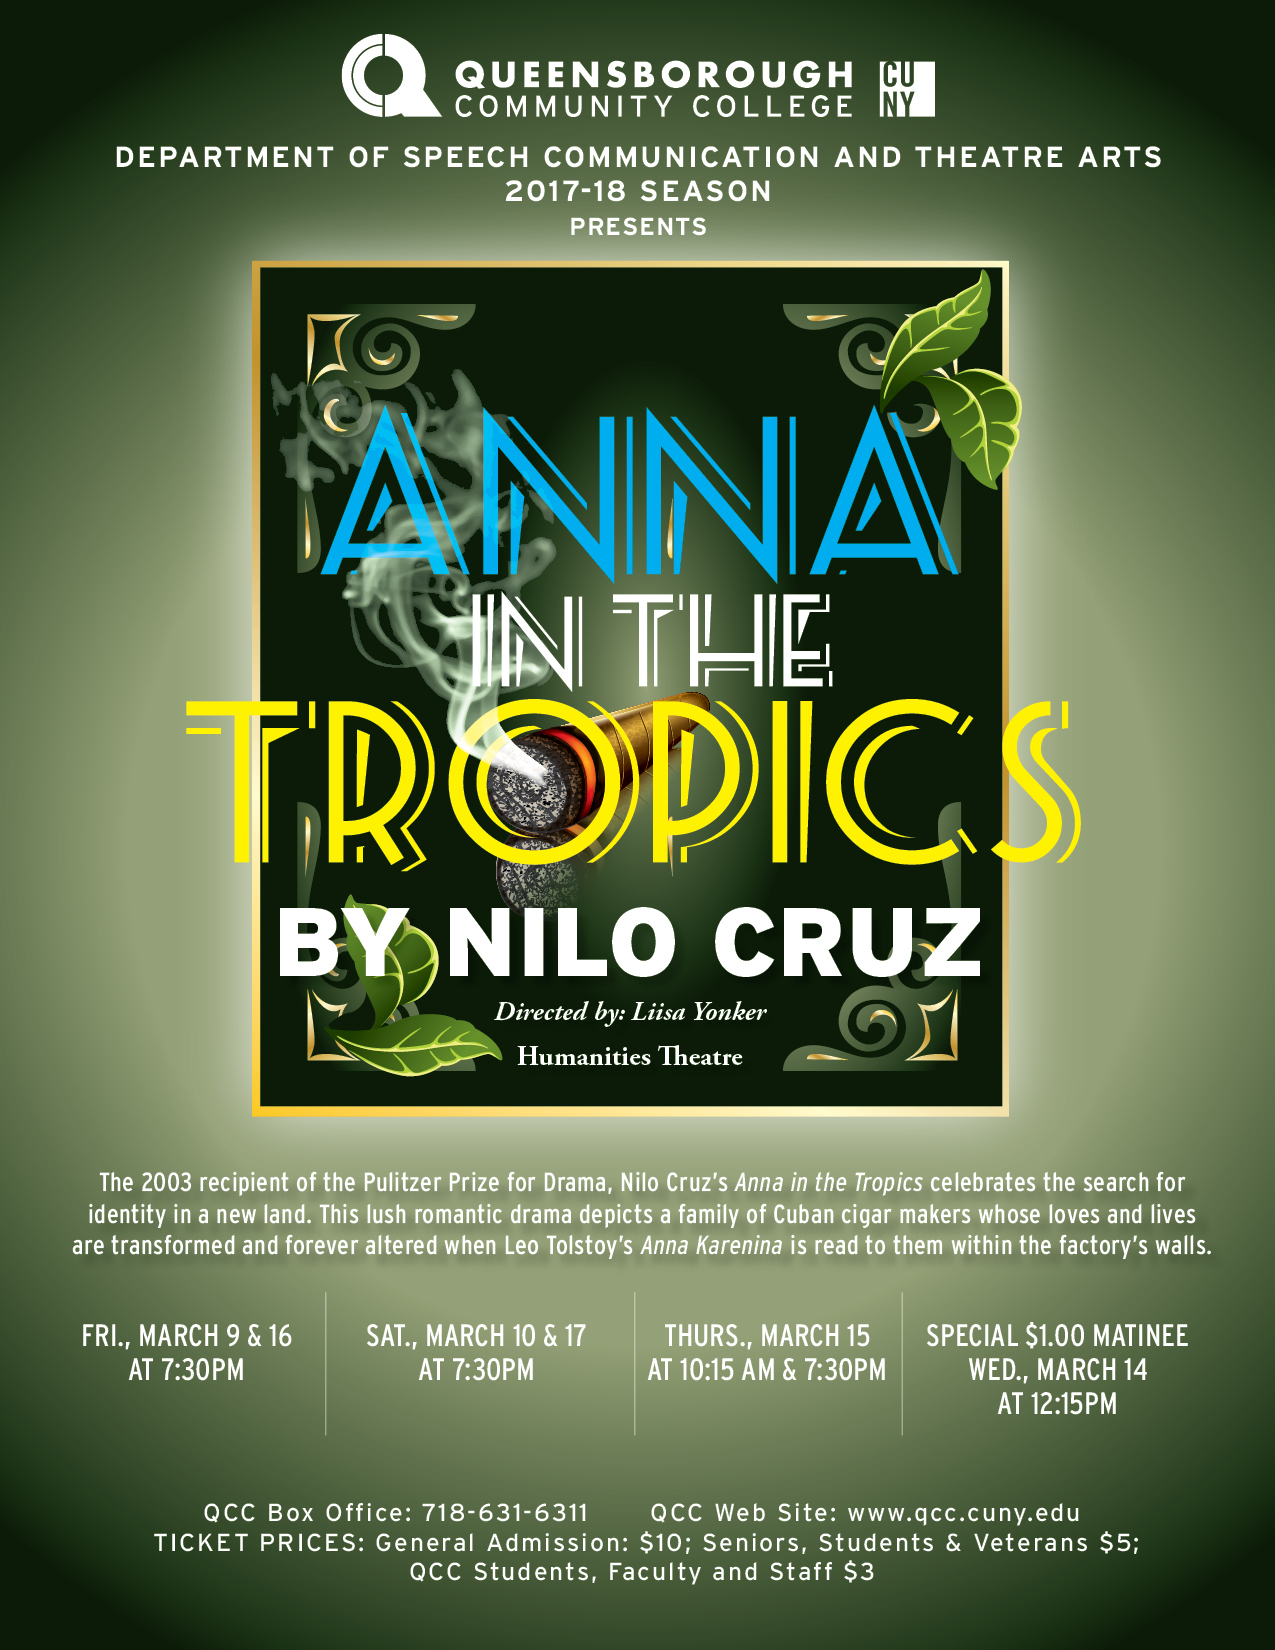 This is a poster for the spring 2017 production of ‘Anna in the Tropics’, written by Nilo Cruz, and directed by Professor Yonker. The poster displays the title in large letters framing a cigar.